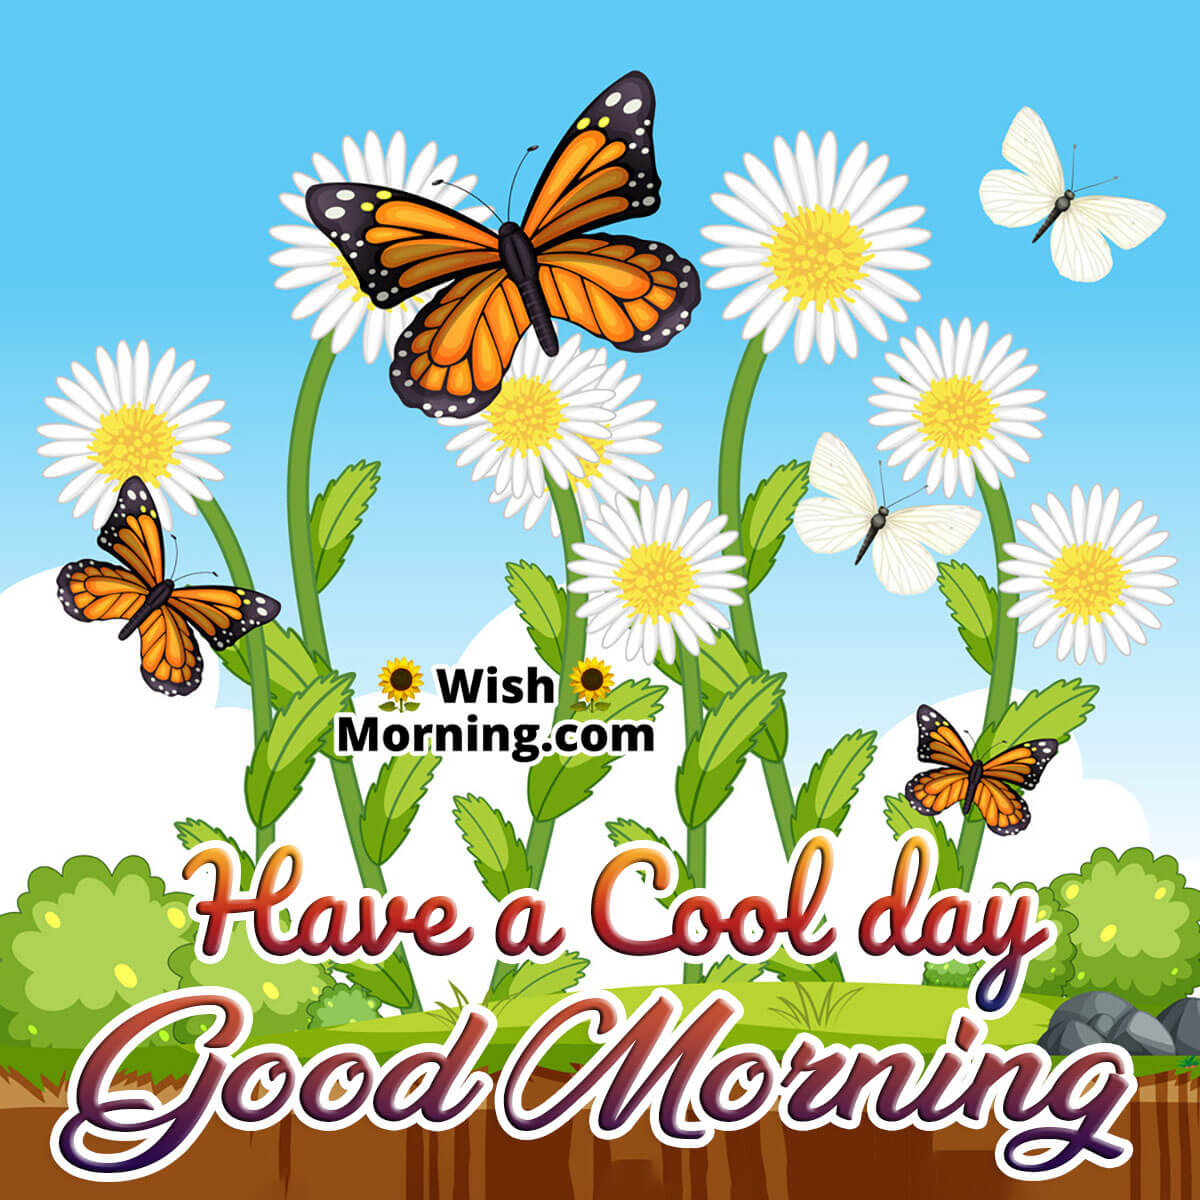 Good Morning Have a Cool day